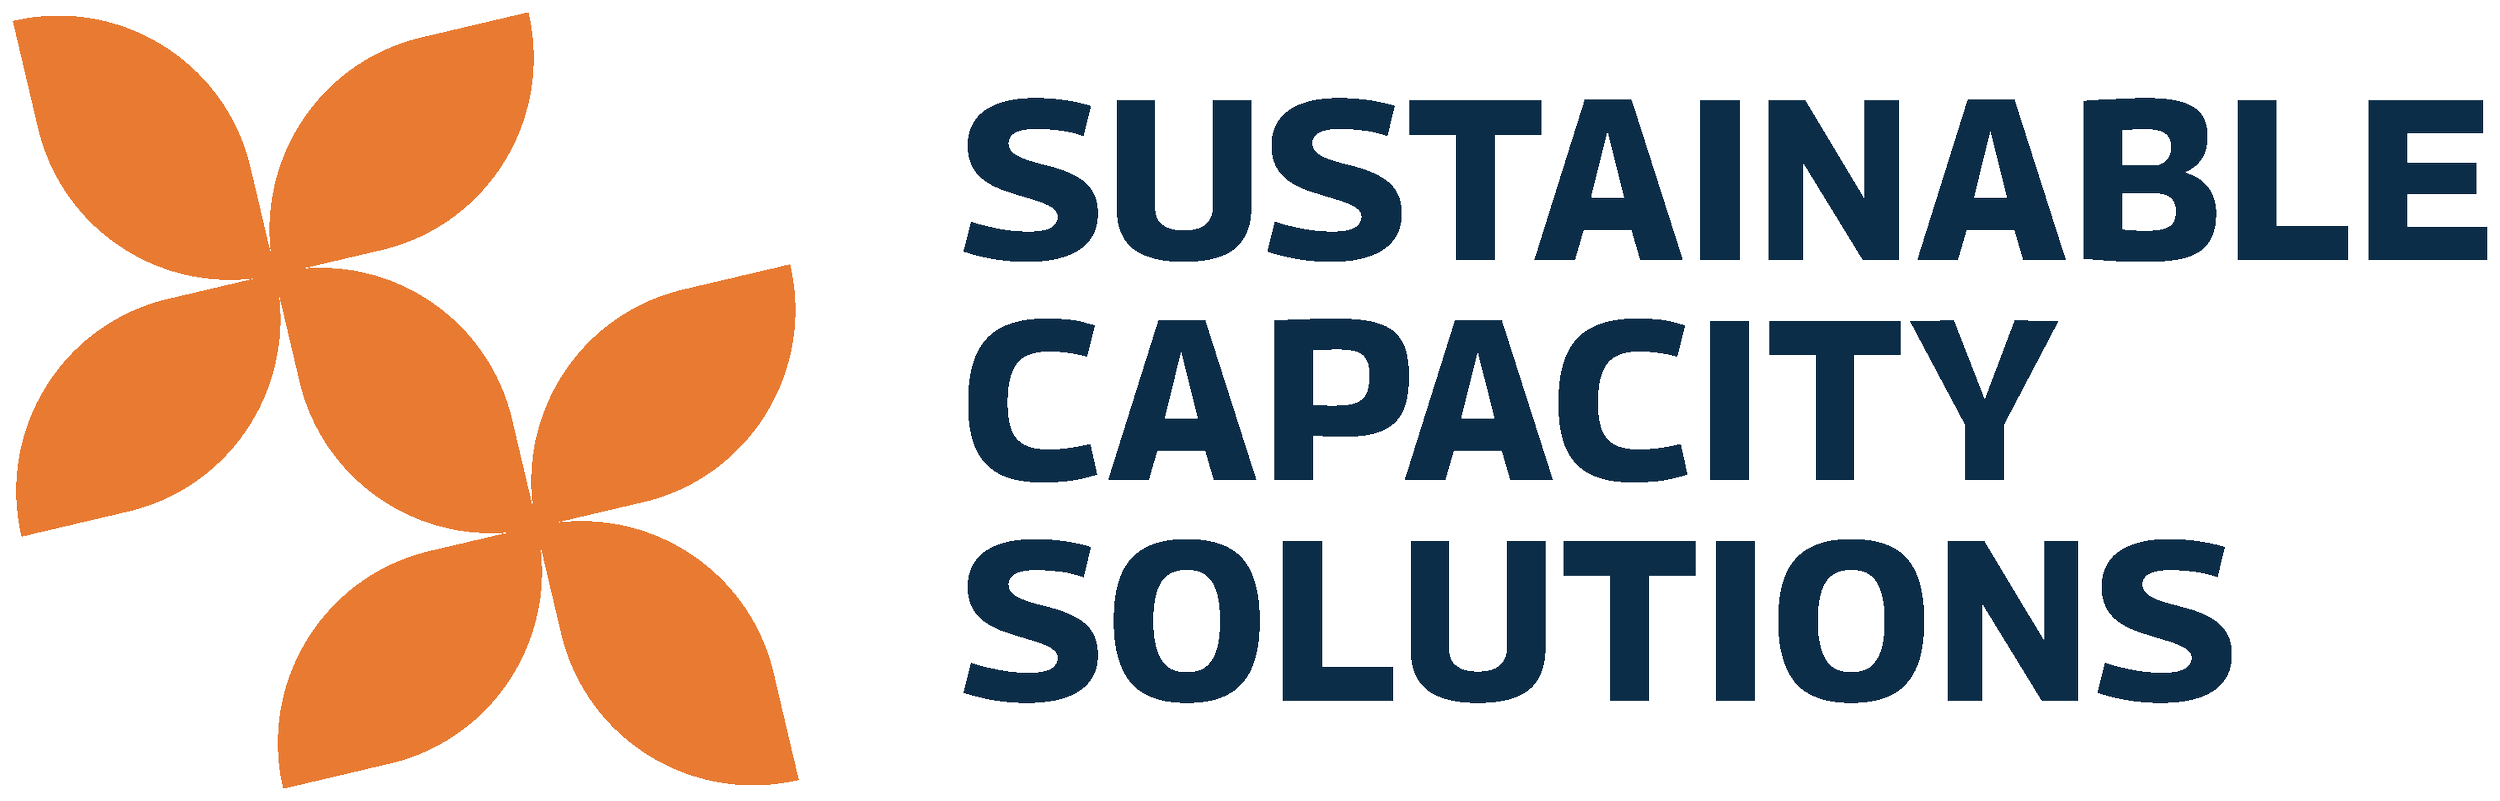 Sustainble Capacity Solutions